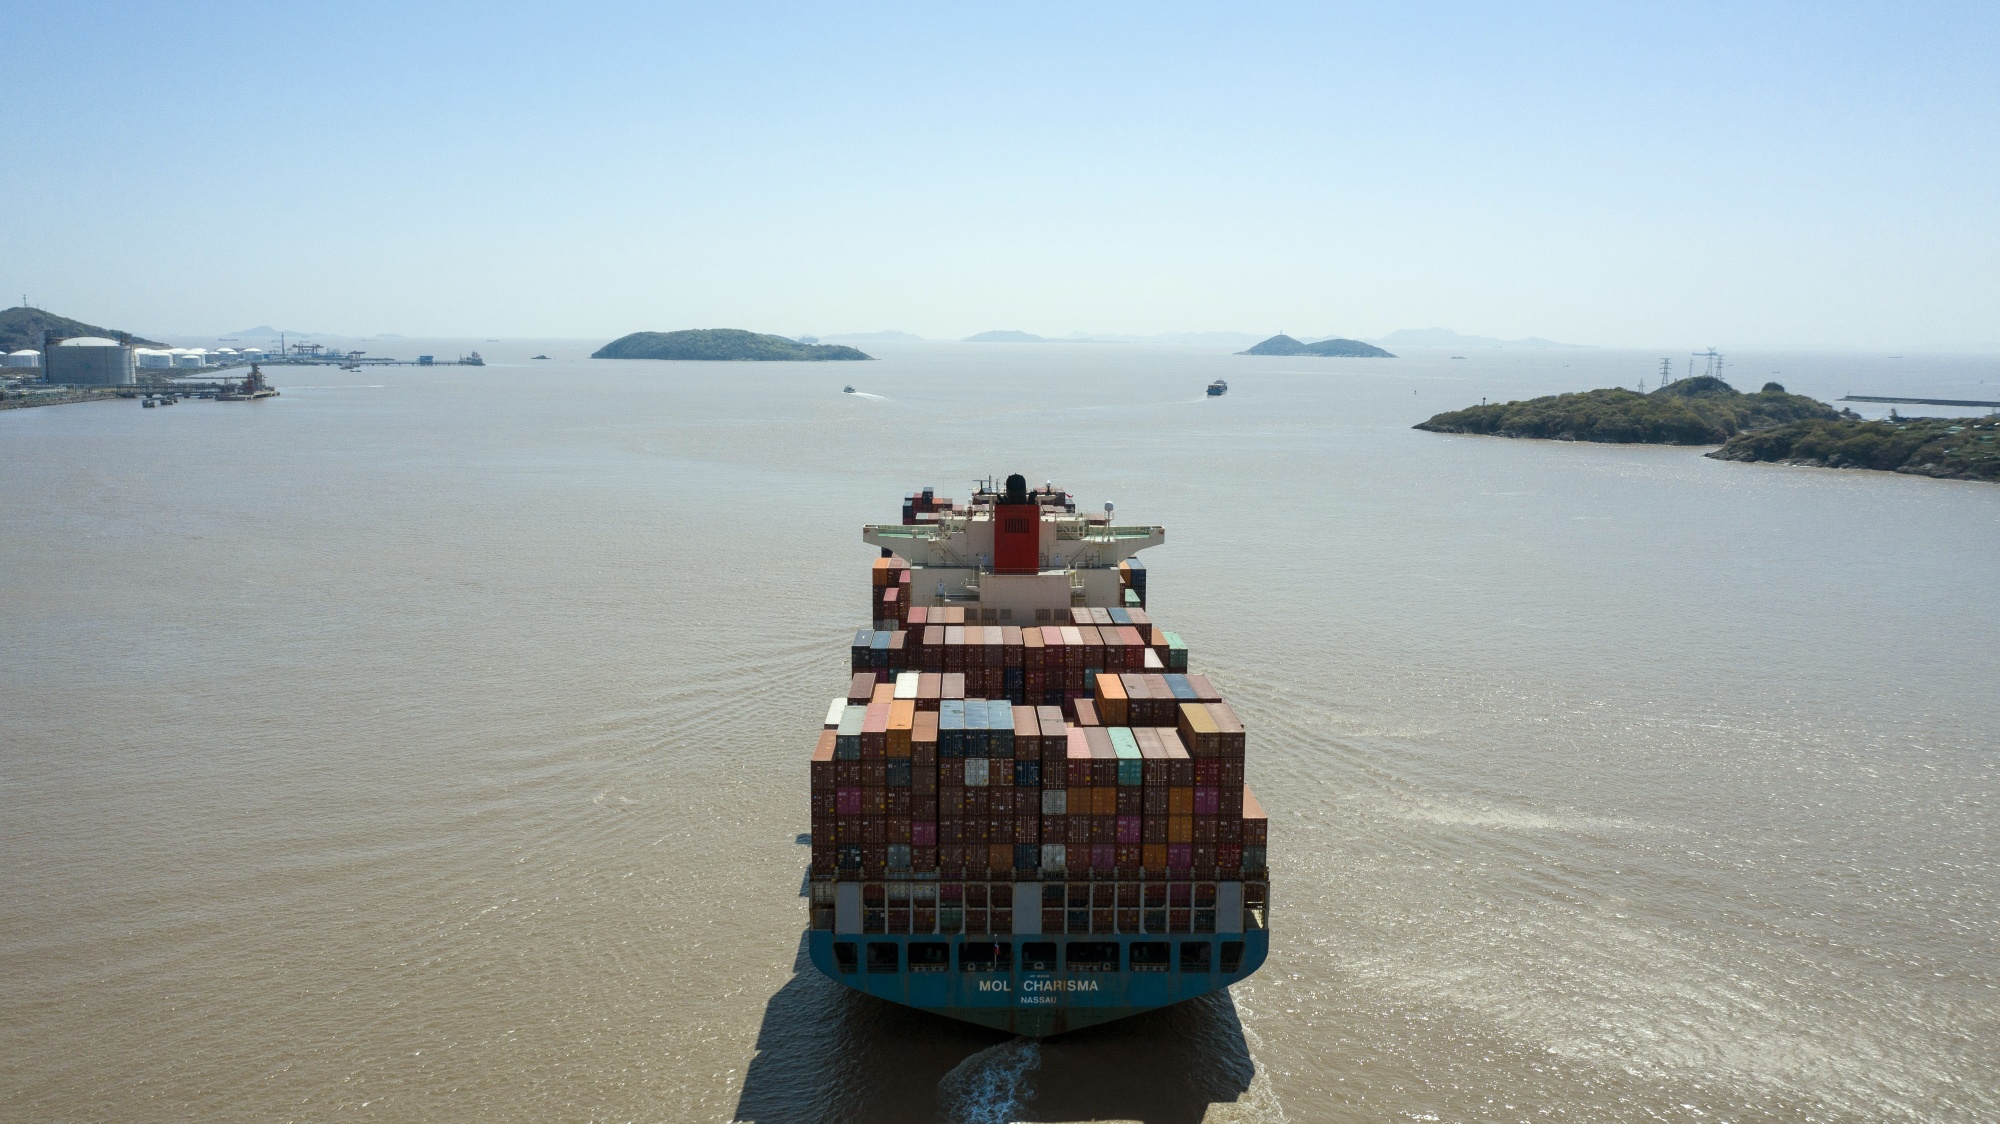 Containers Port In Shanghai Ahead of Trade Figures